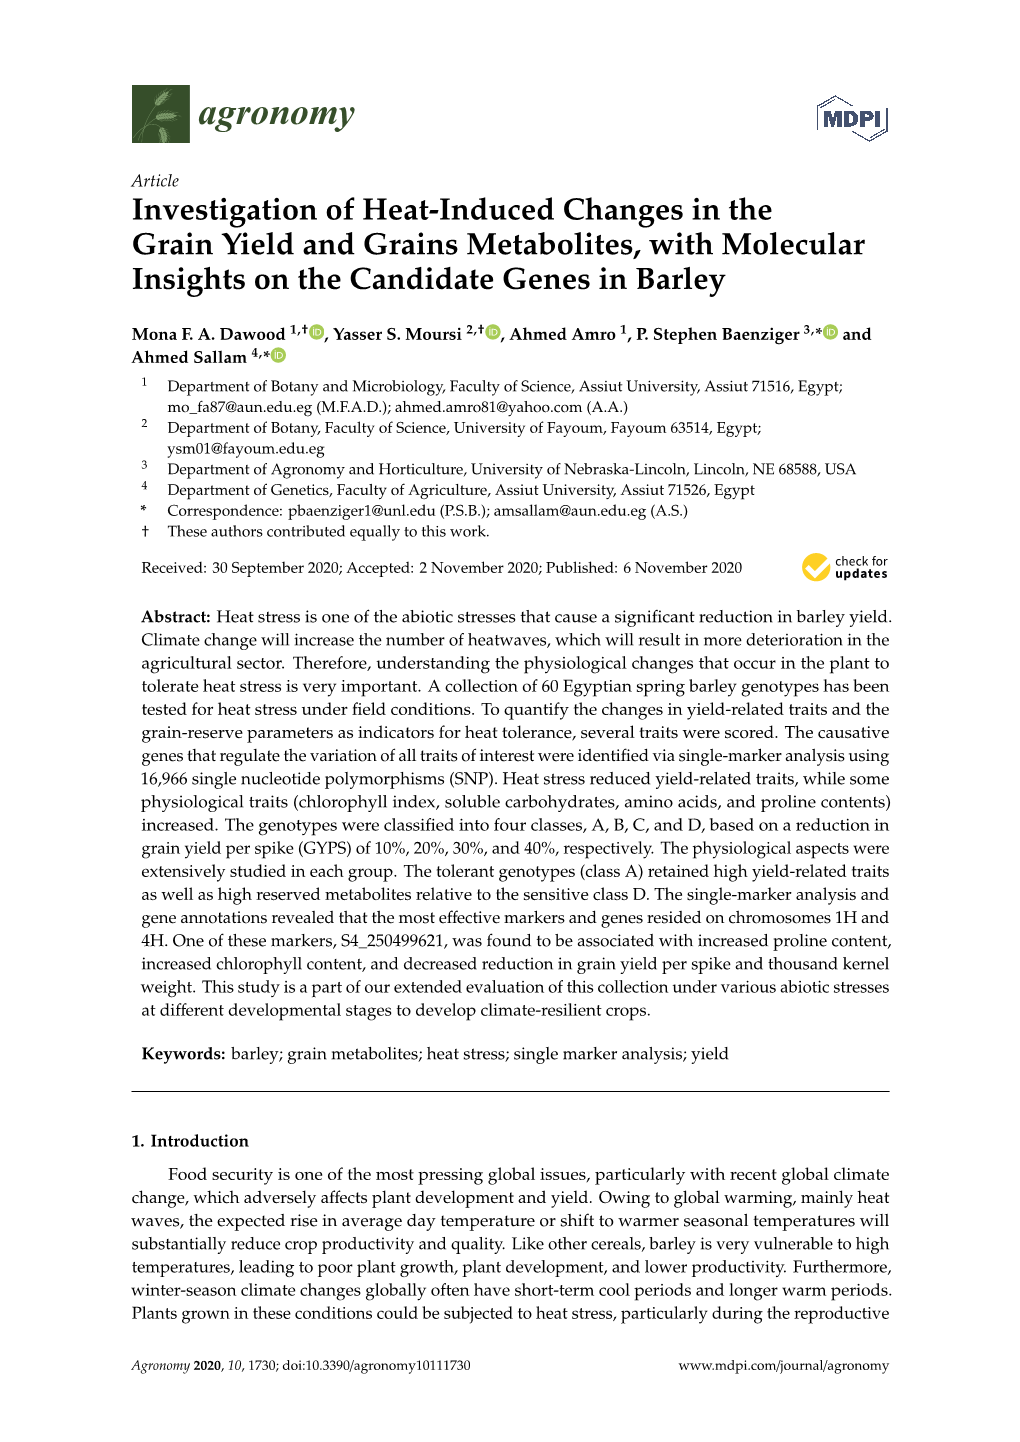 Investigation of Heat-Induced Changes in the Grain Yield and Grains Metabolites, with Molecular Insights on the Candidate Genes in Barley